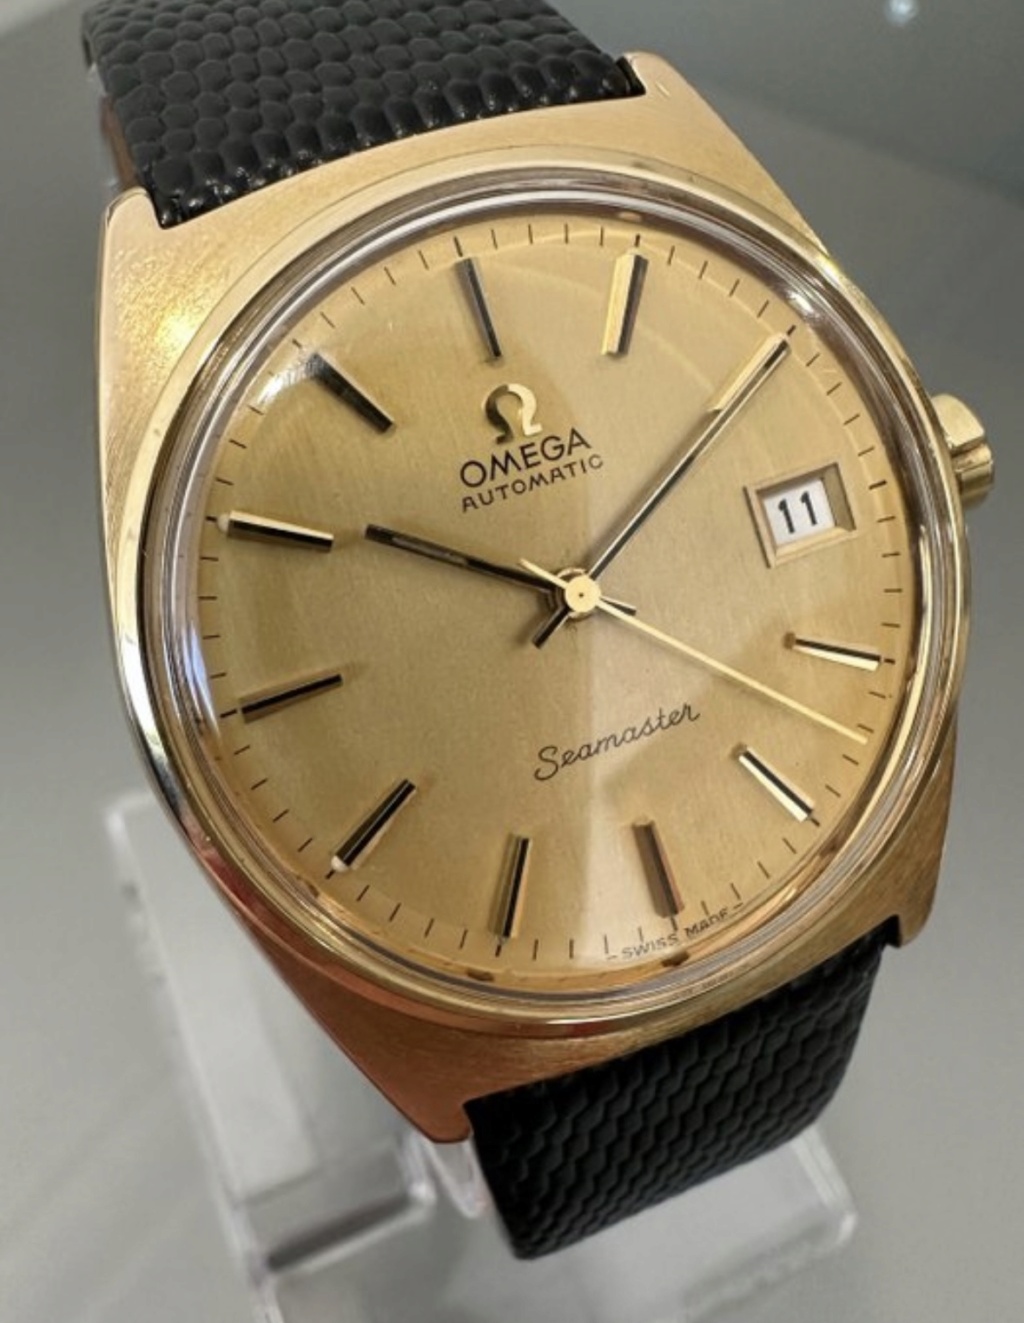 Achat omega vintage besoin de conseil Img_0812